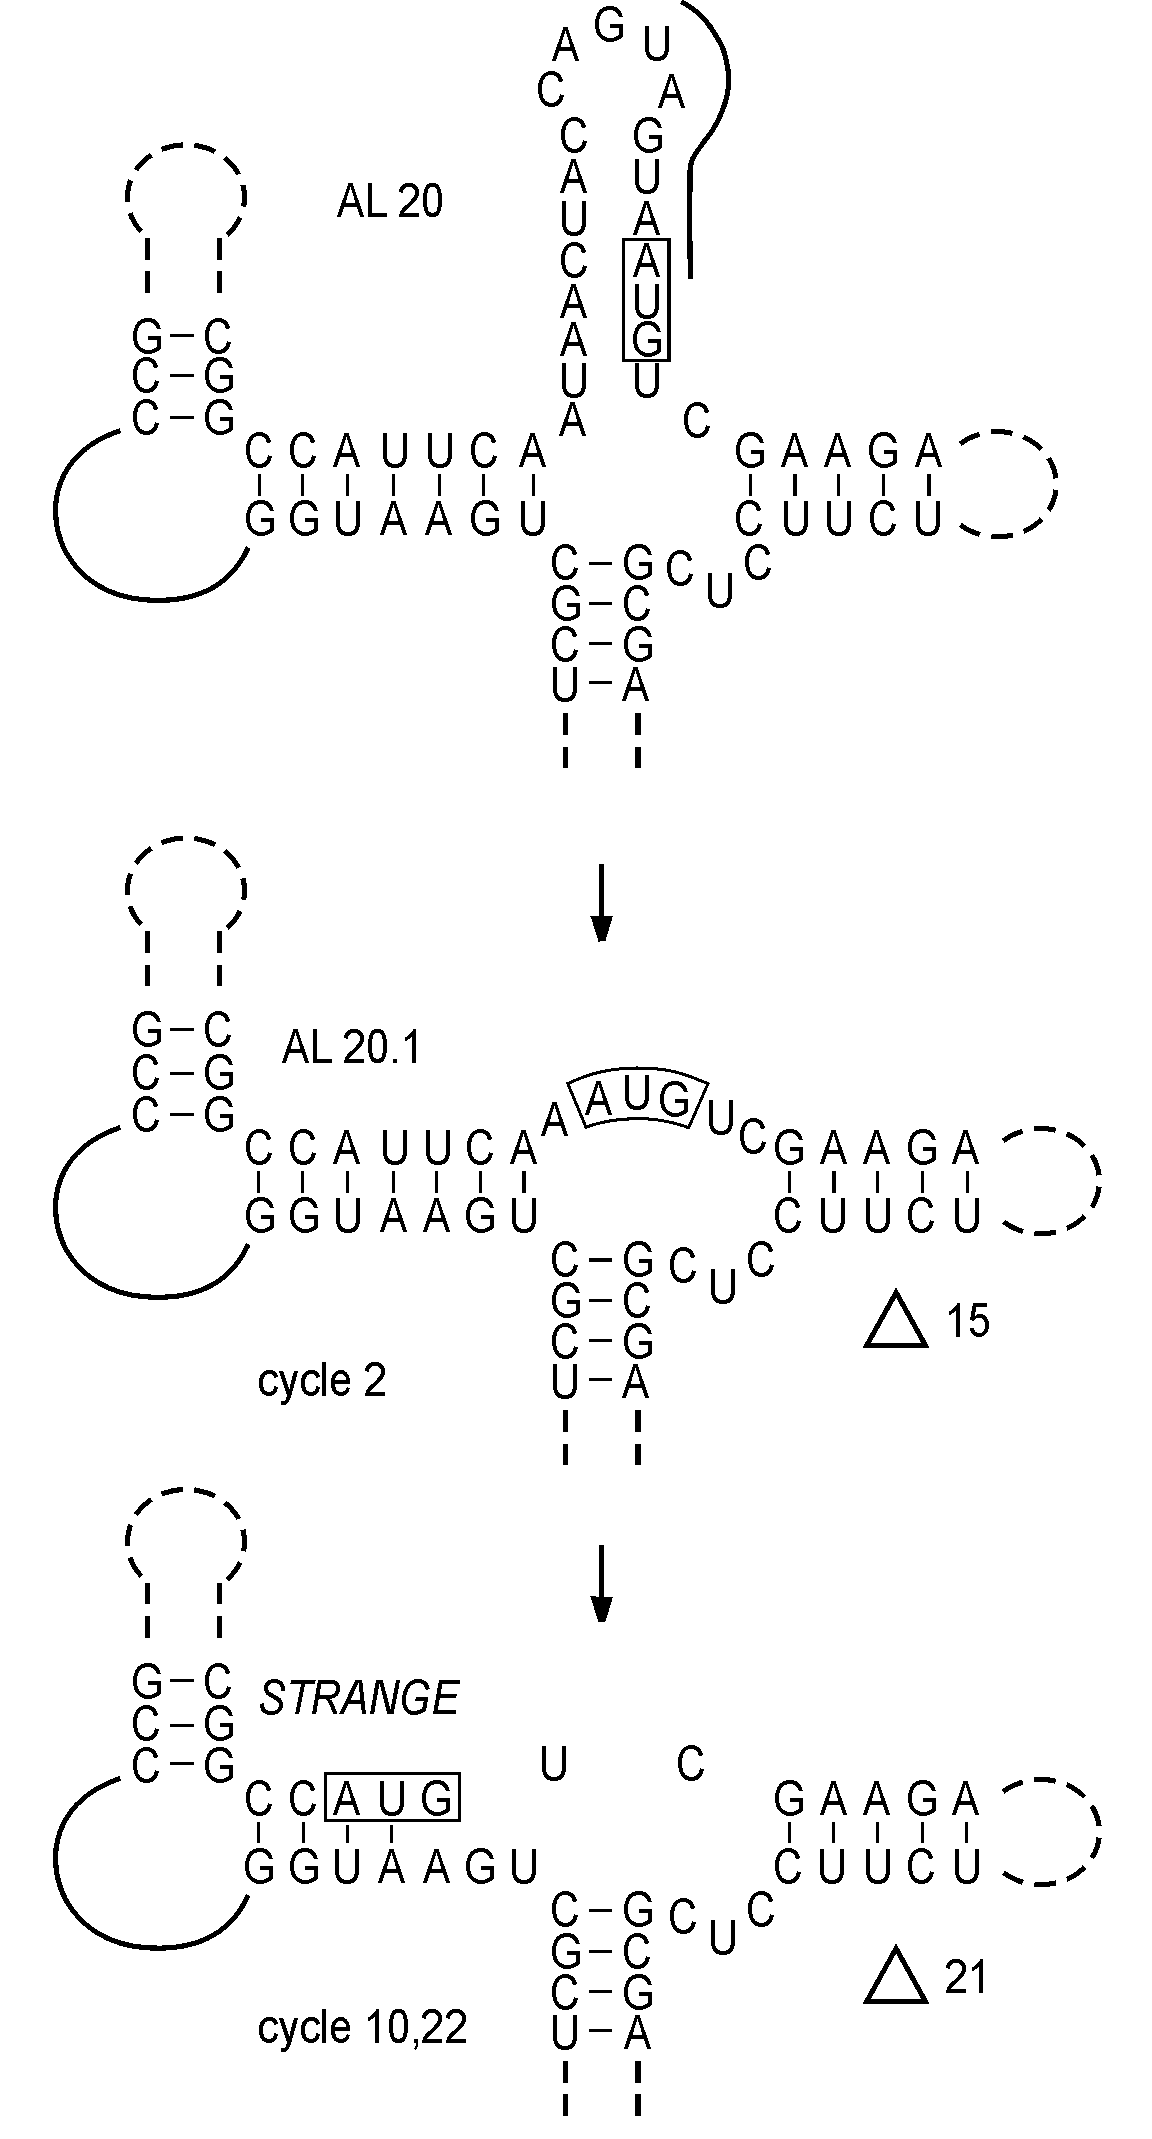 Evolution of MS2 mutant AL20 containing multiple point mutations in the replicase operator hairpin, some of which have created two consecutive stopcodons in the reading frame of the lysis gene. Evolution deletes the complete operator including the stopcodons and restores the lysis function at the expense of the operator.